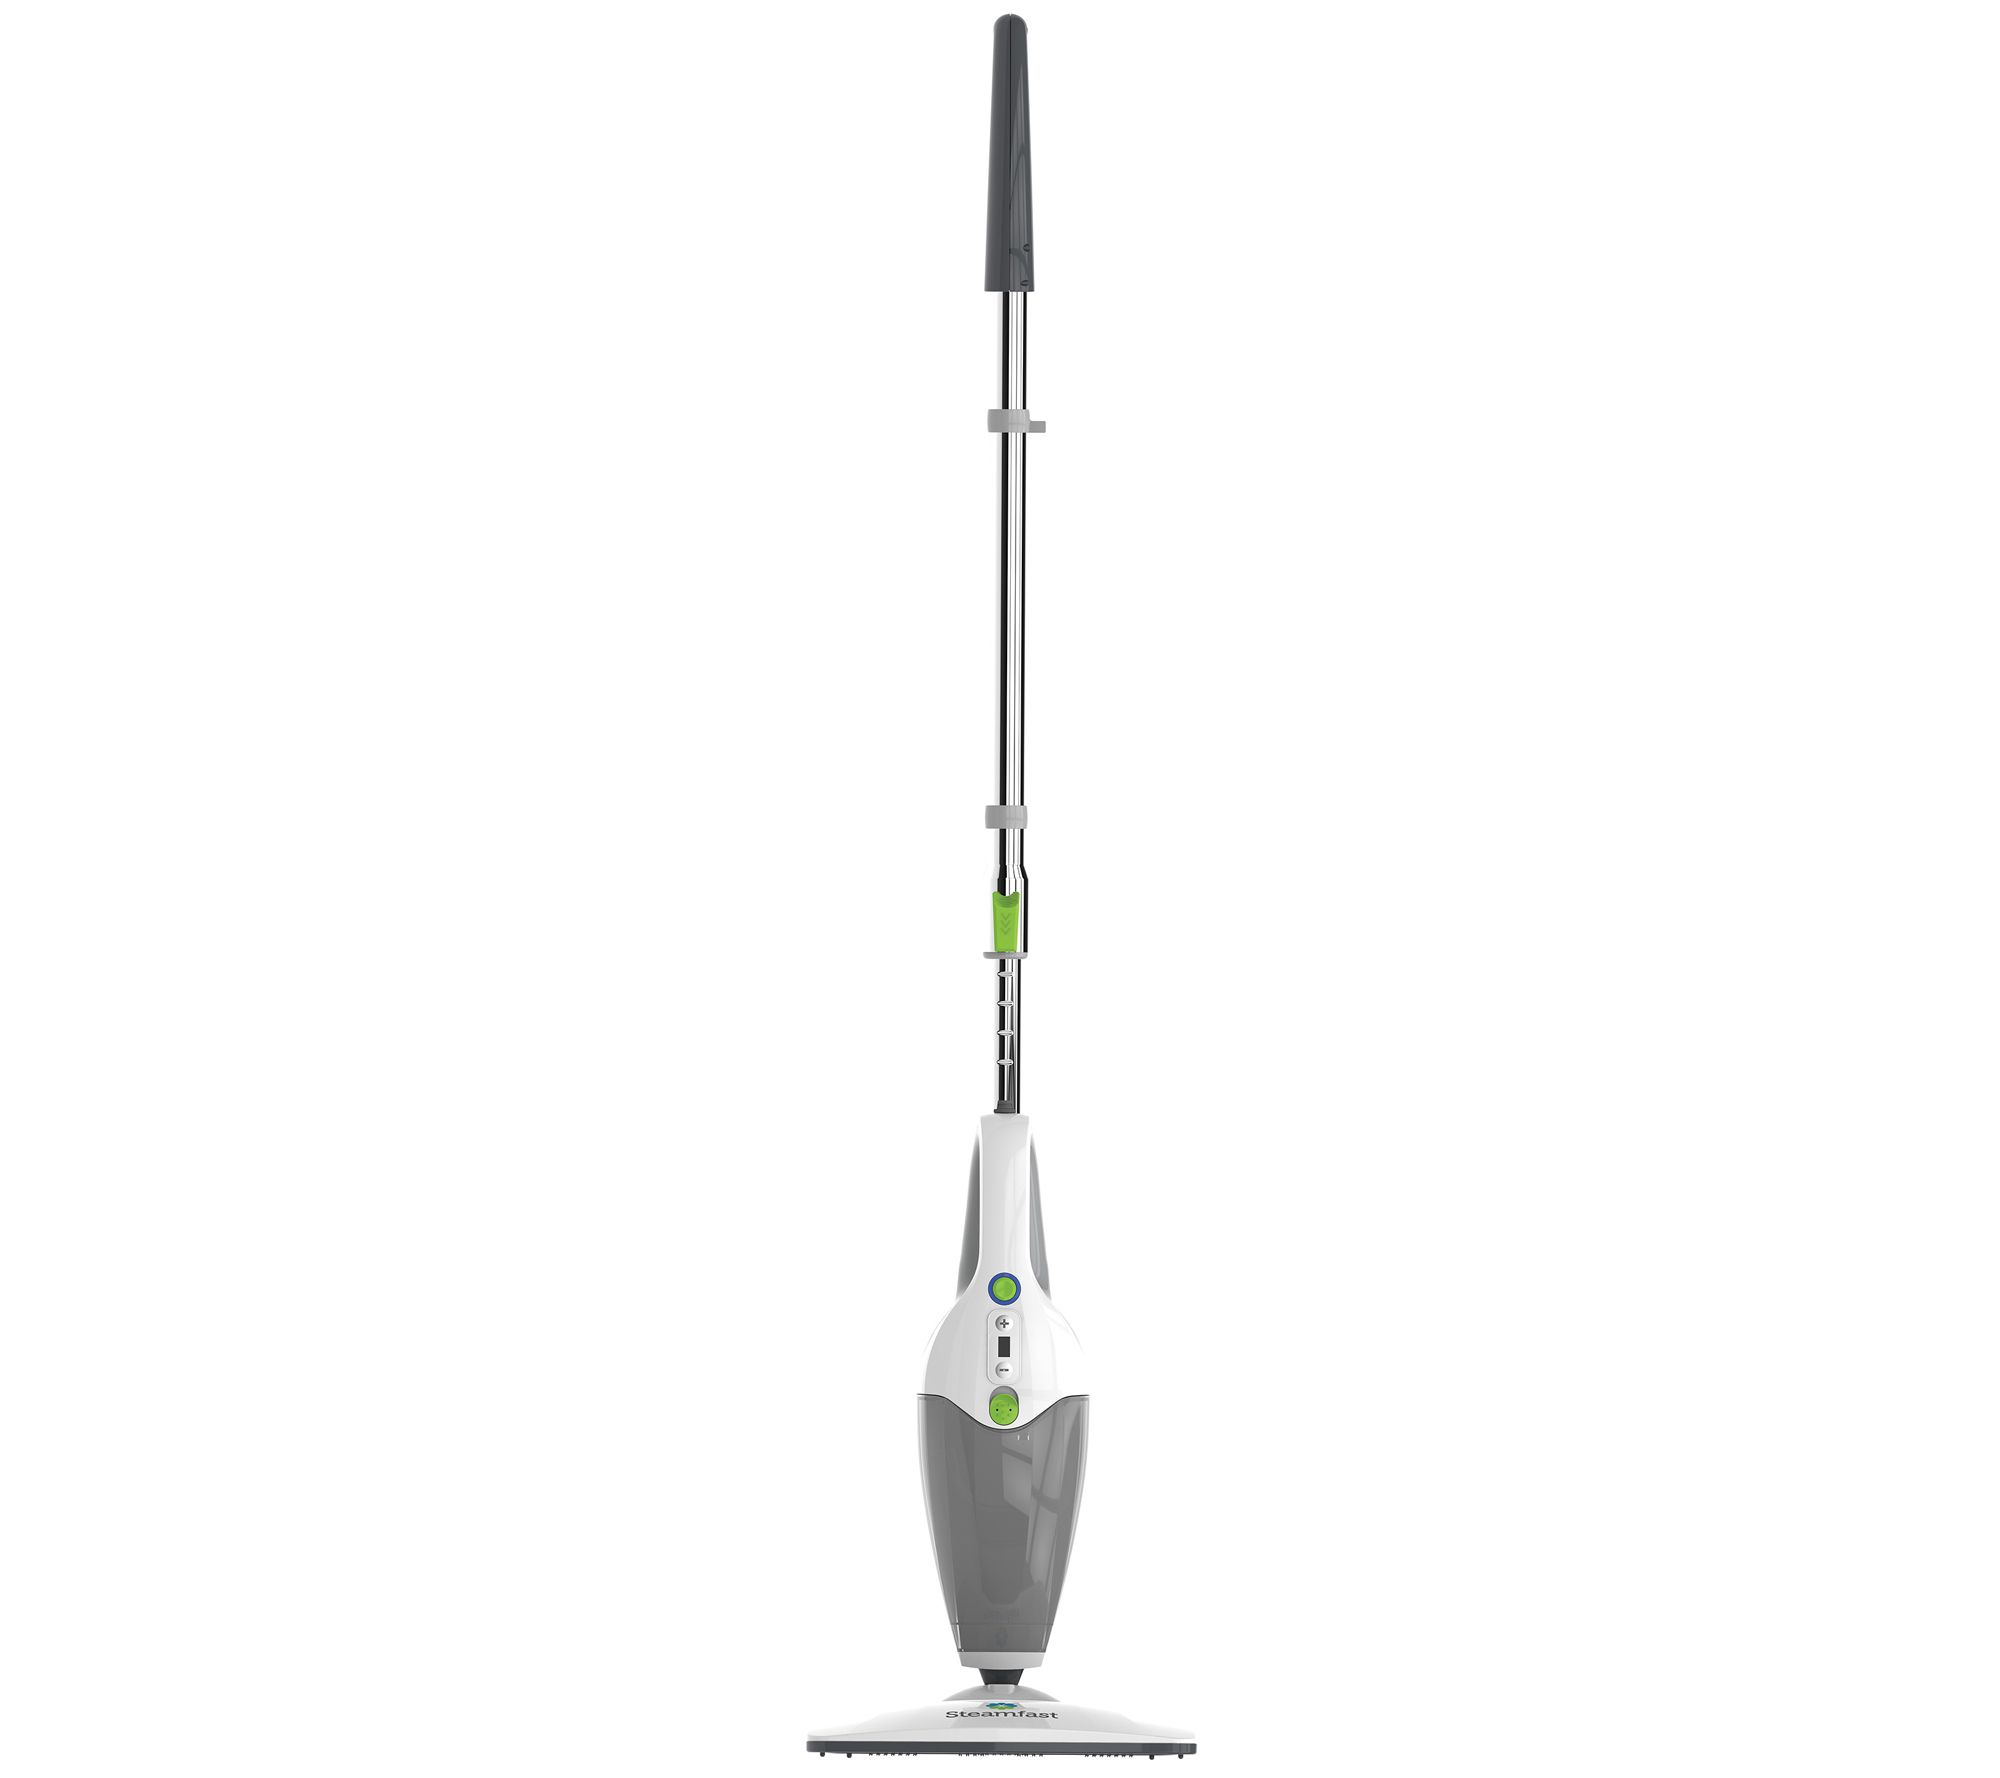 SteamFast Multi-Purpose Canister Steam Cleaner SF-370WH - The Home